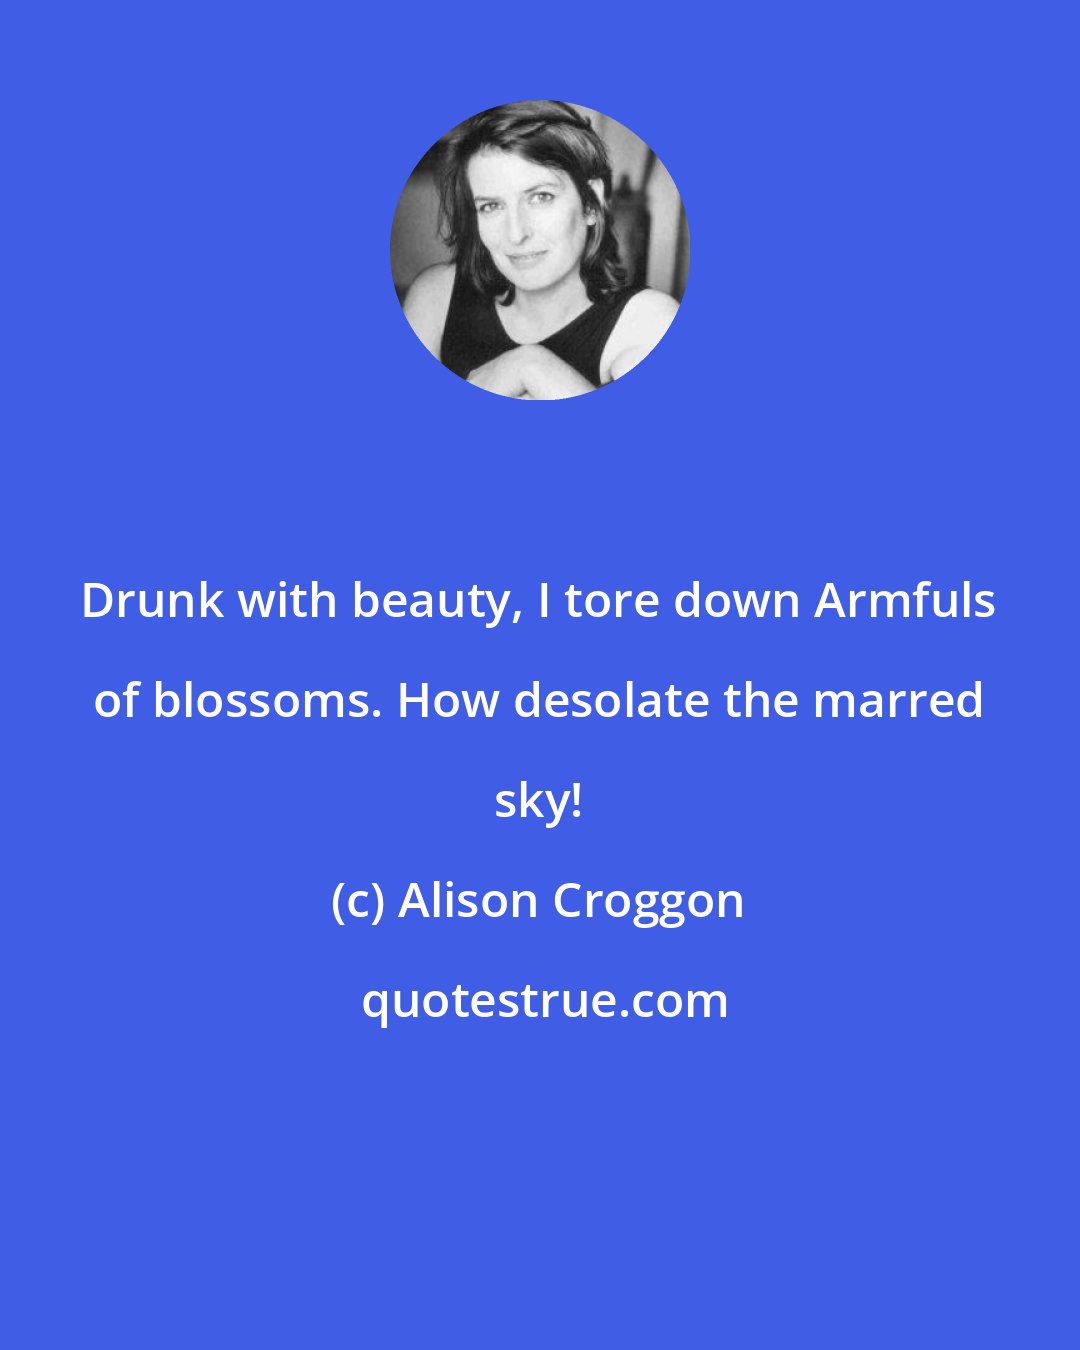 Alison Croggon: Drunk with beauty, I tore down Armfuls of blossoms. How desolate the marred sky!